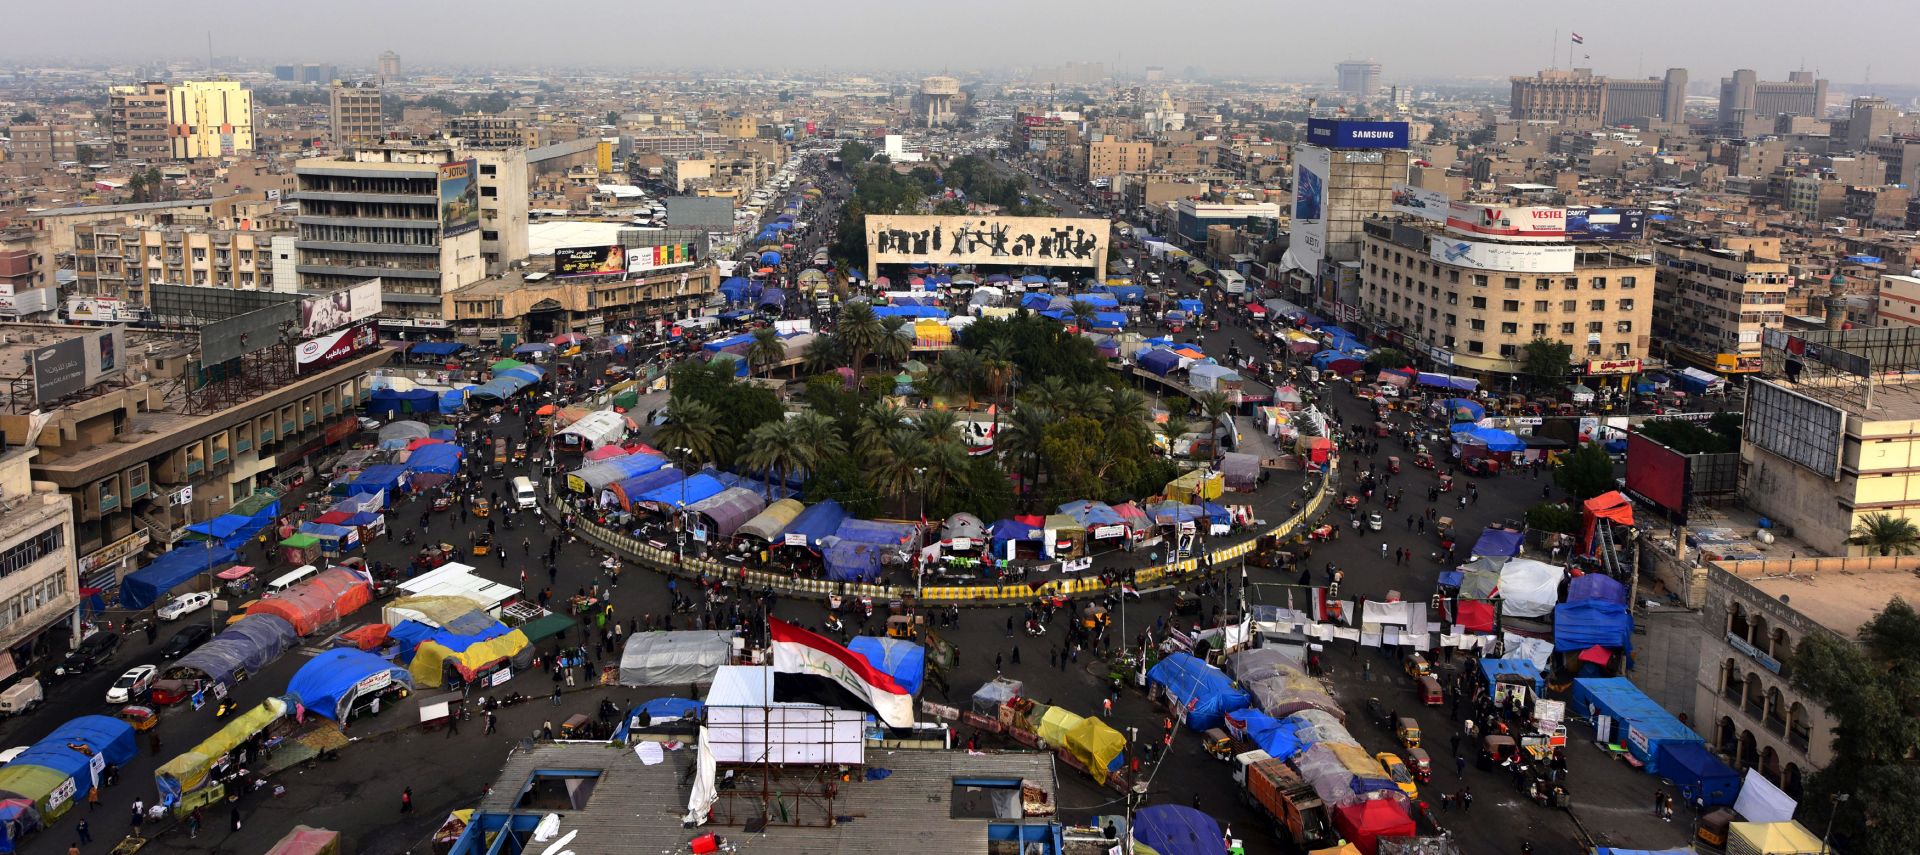 epaselect epa08075907 Iraqi protesters gather during the ongoing protests at the Al Tahrir square in central Baghdad, Iraq, 16 December 2019. Protests continue in Baghdad and southern Iraqi cities since October 2019 with rising casualties of more than 300 people, while protesters are calling for the resignation of all senior officials in the country after Prime Minister Adel Abdul Mahdi stepped down.  EPA/MURTAJA LATEEF